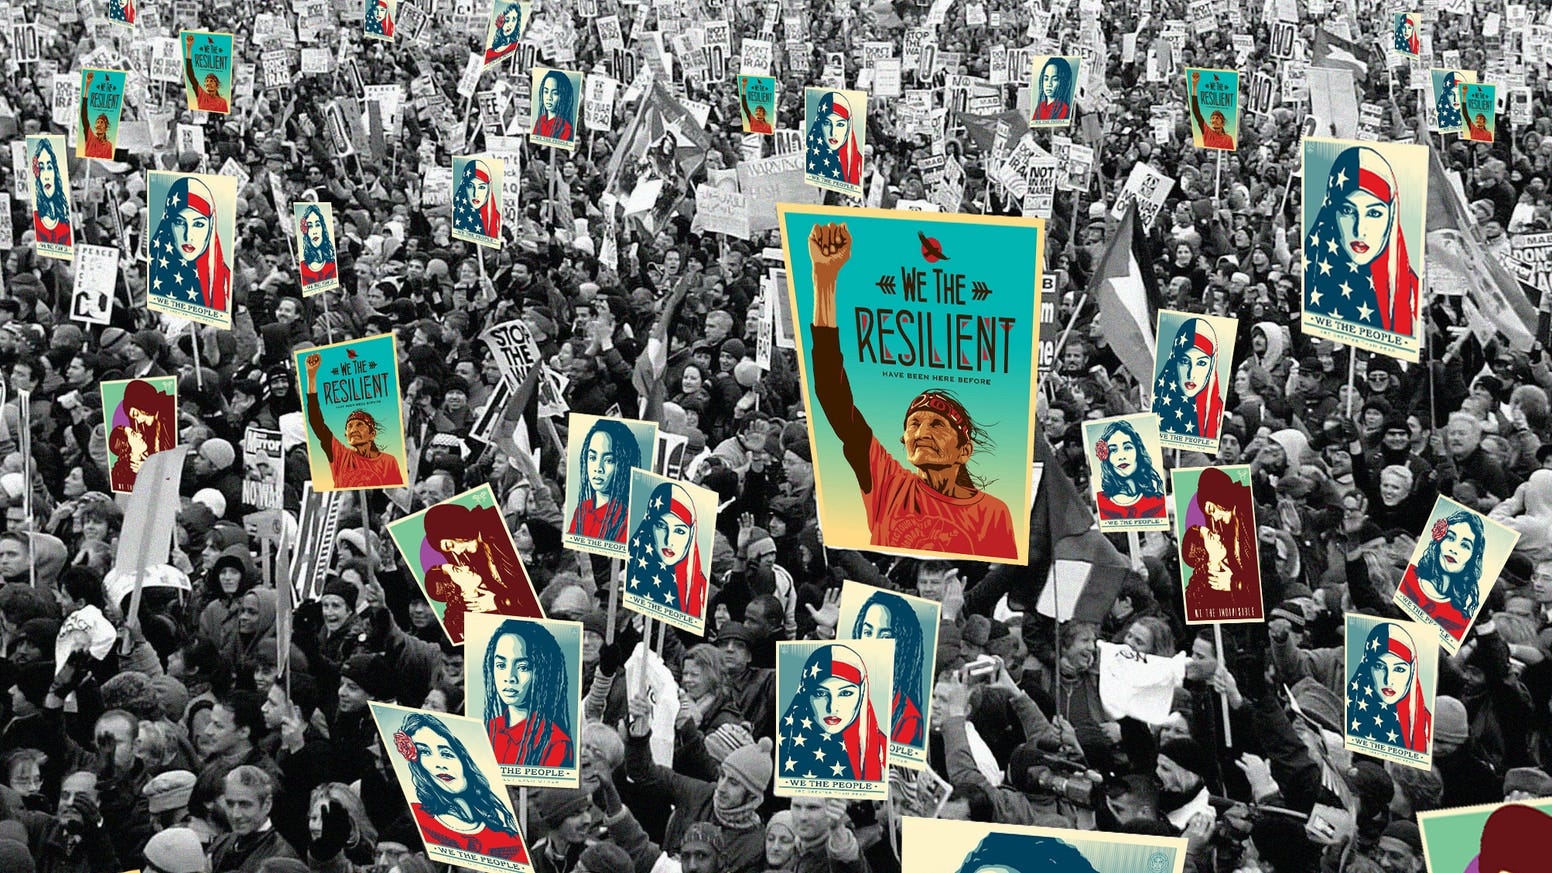 Photo montage with a black and white picture of a demonstration crowd, on the background, and the images of the We The People posters, in colour, replacing the original posters in the picture.